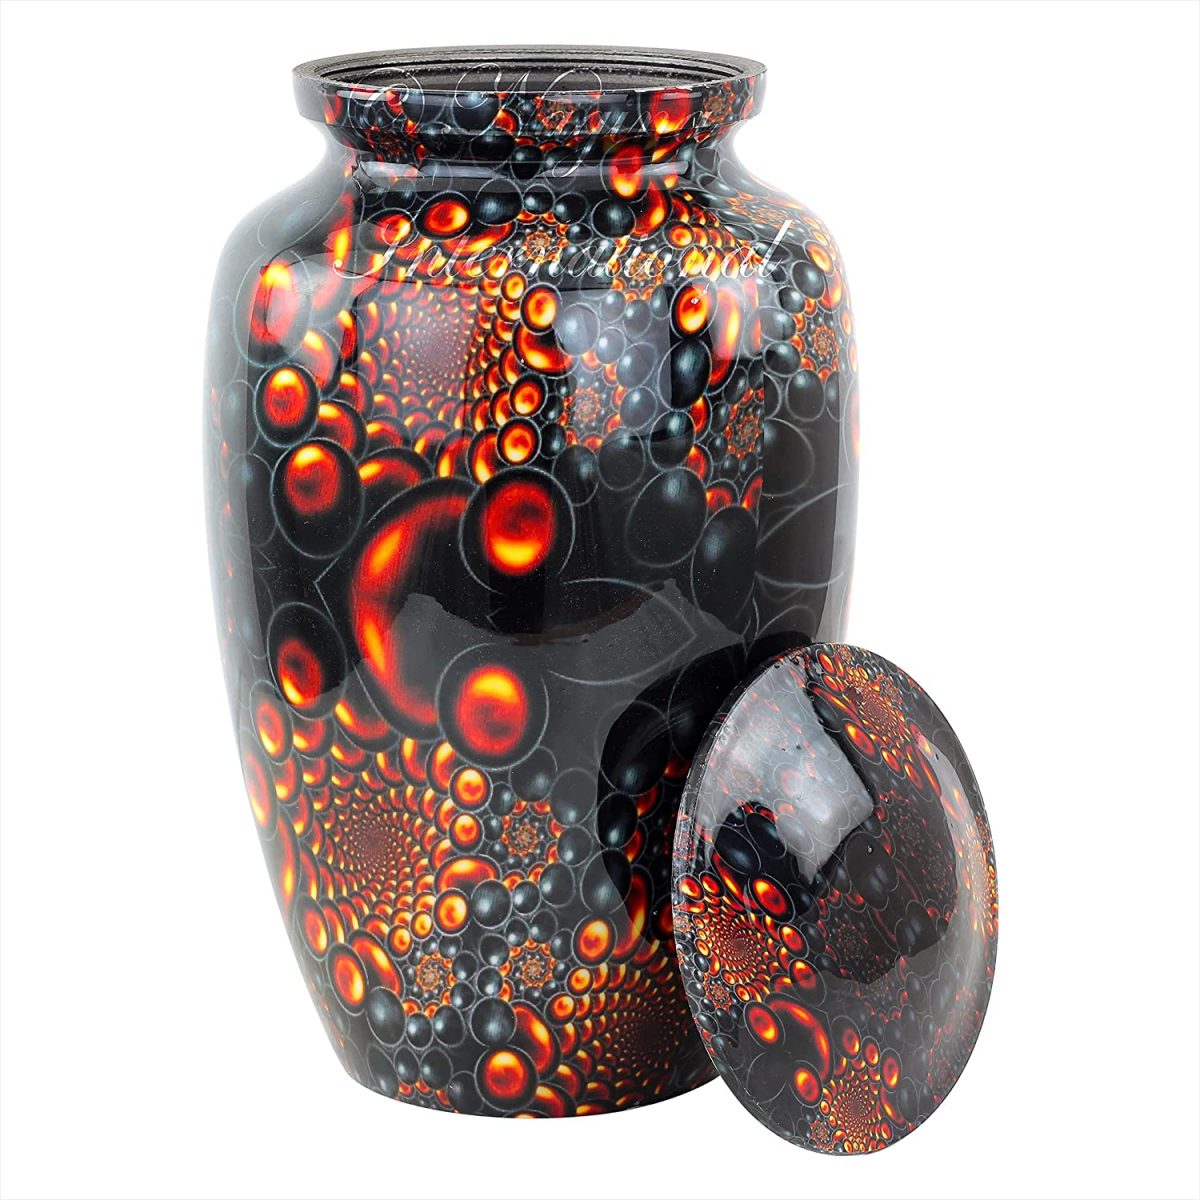 10" Aluminum Cremation Funeral Urns for Adult Human & Pet Loss (Neon Black)